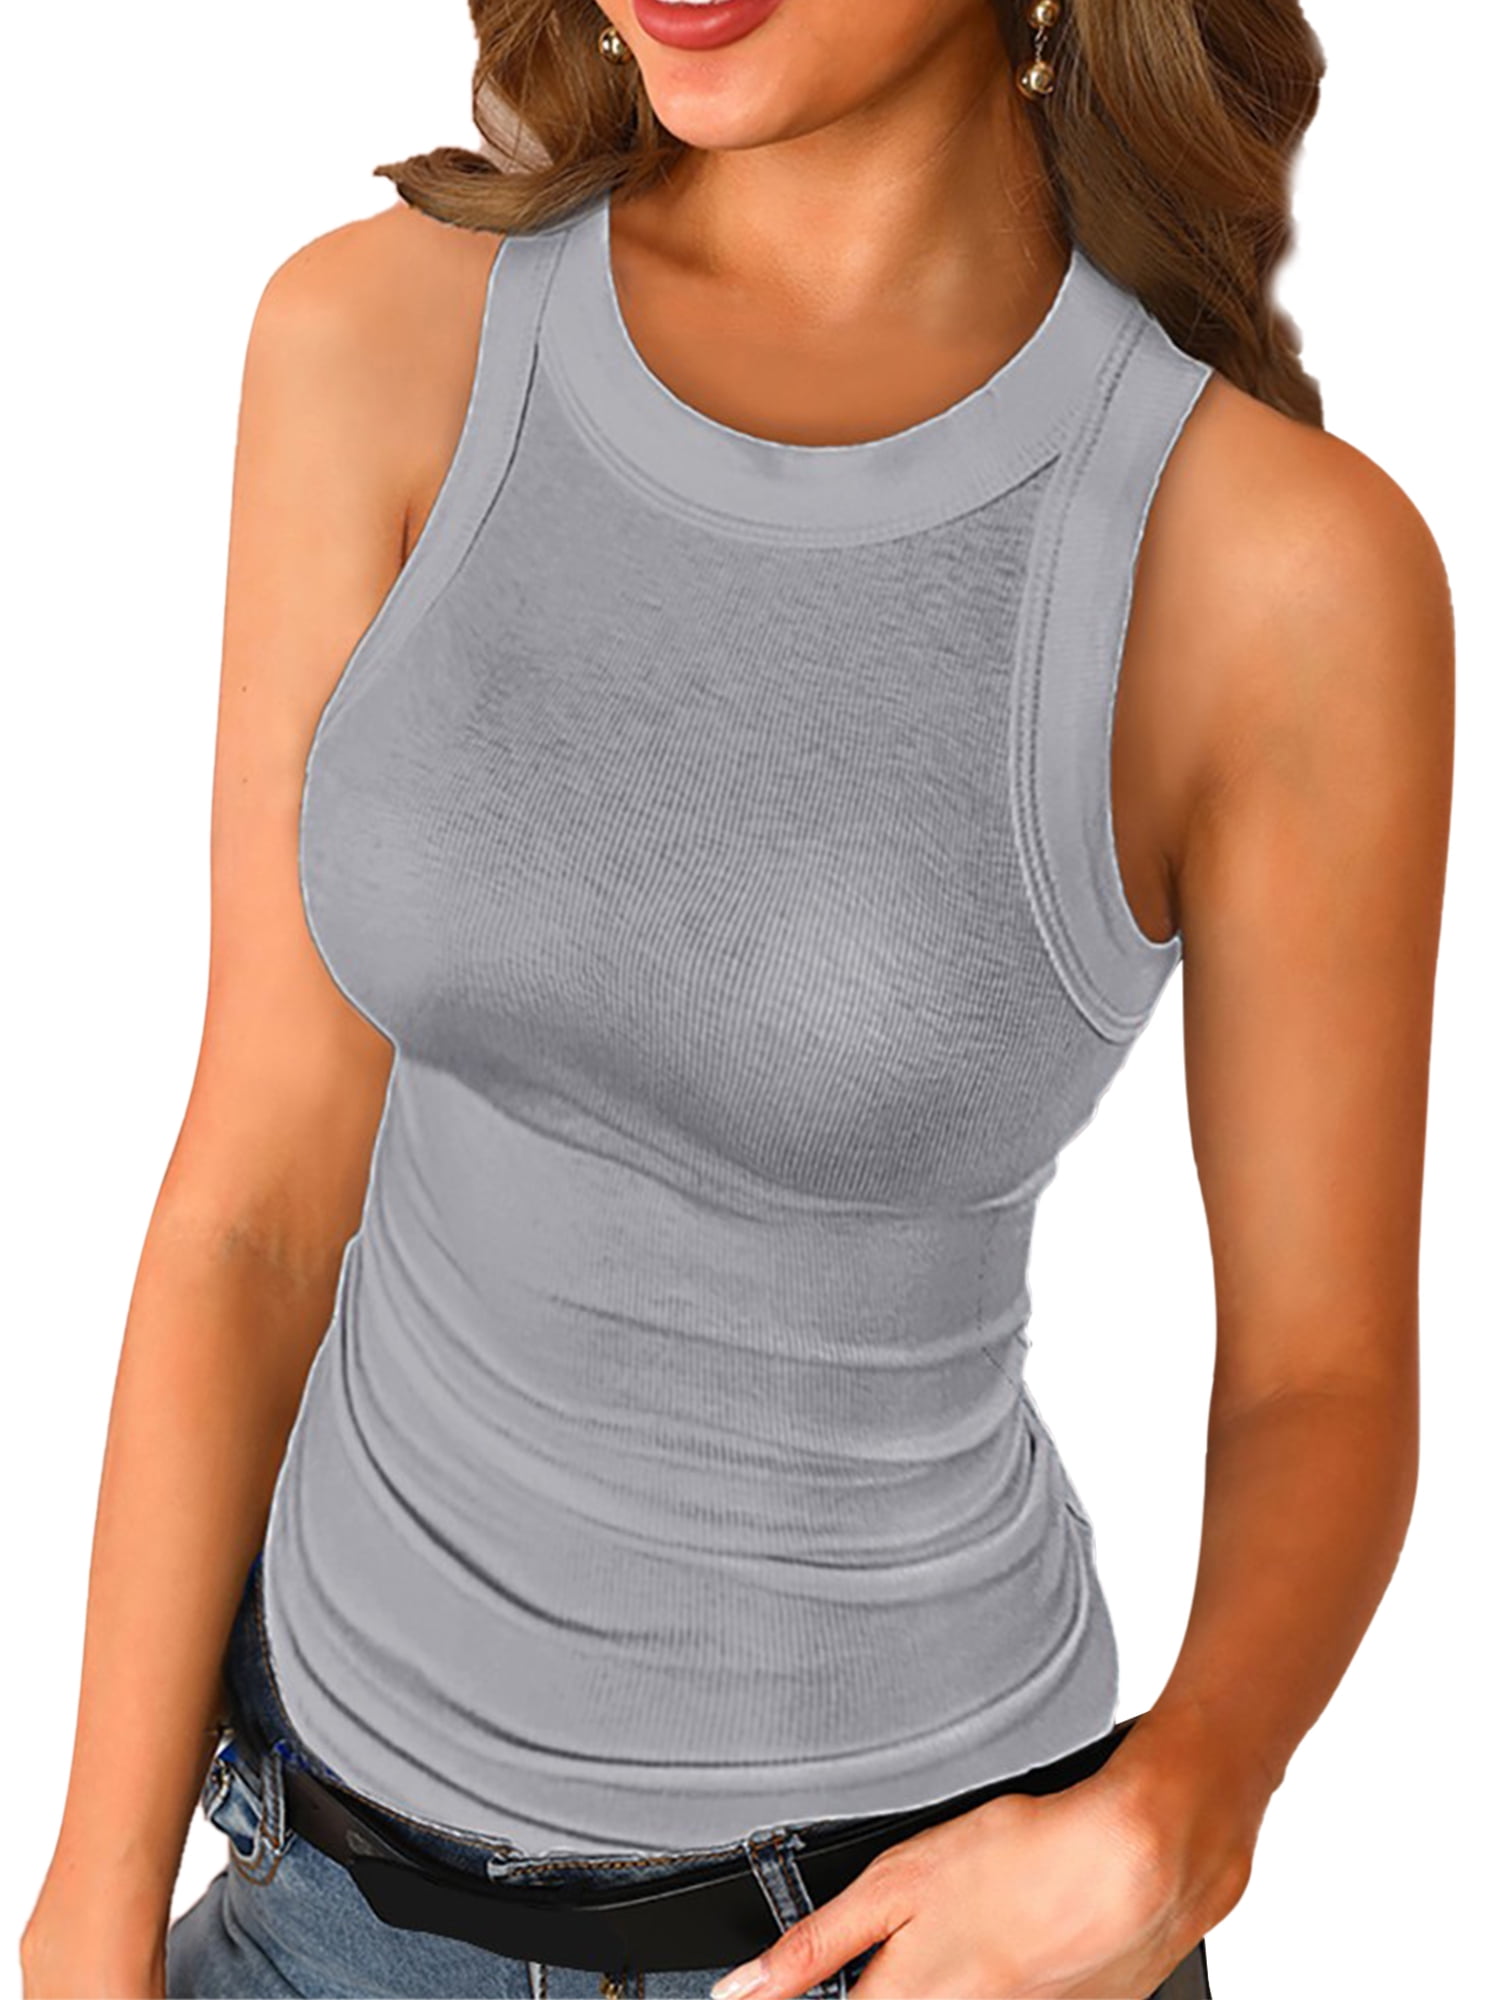 Women Workout Tank Top Sleevelss Ribbed Stretch Yoga Top Tthletic  Compression Active Wear Seamless Tight Sports Running T Shirt Vest Gray  XL=US 14